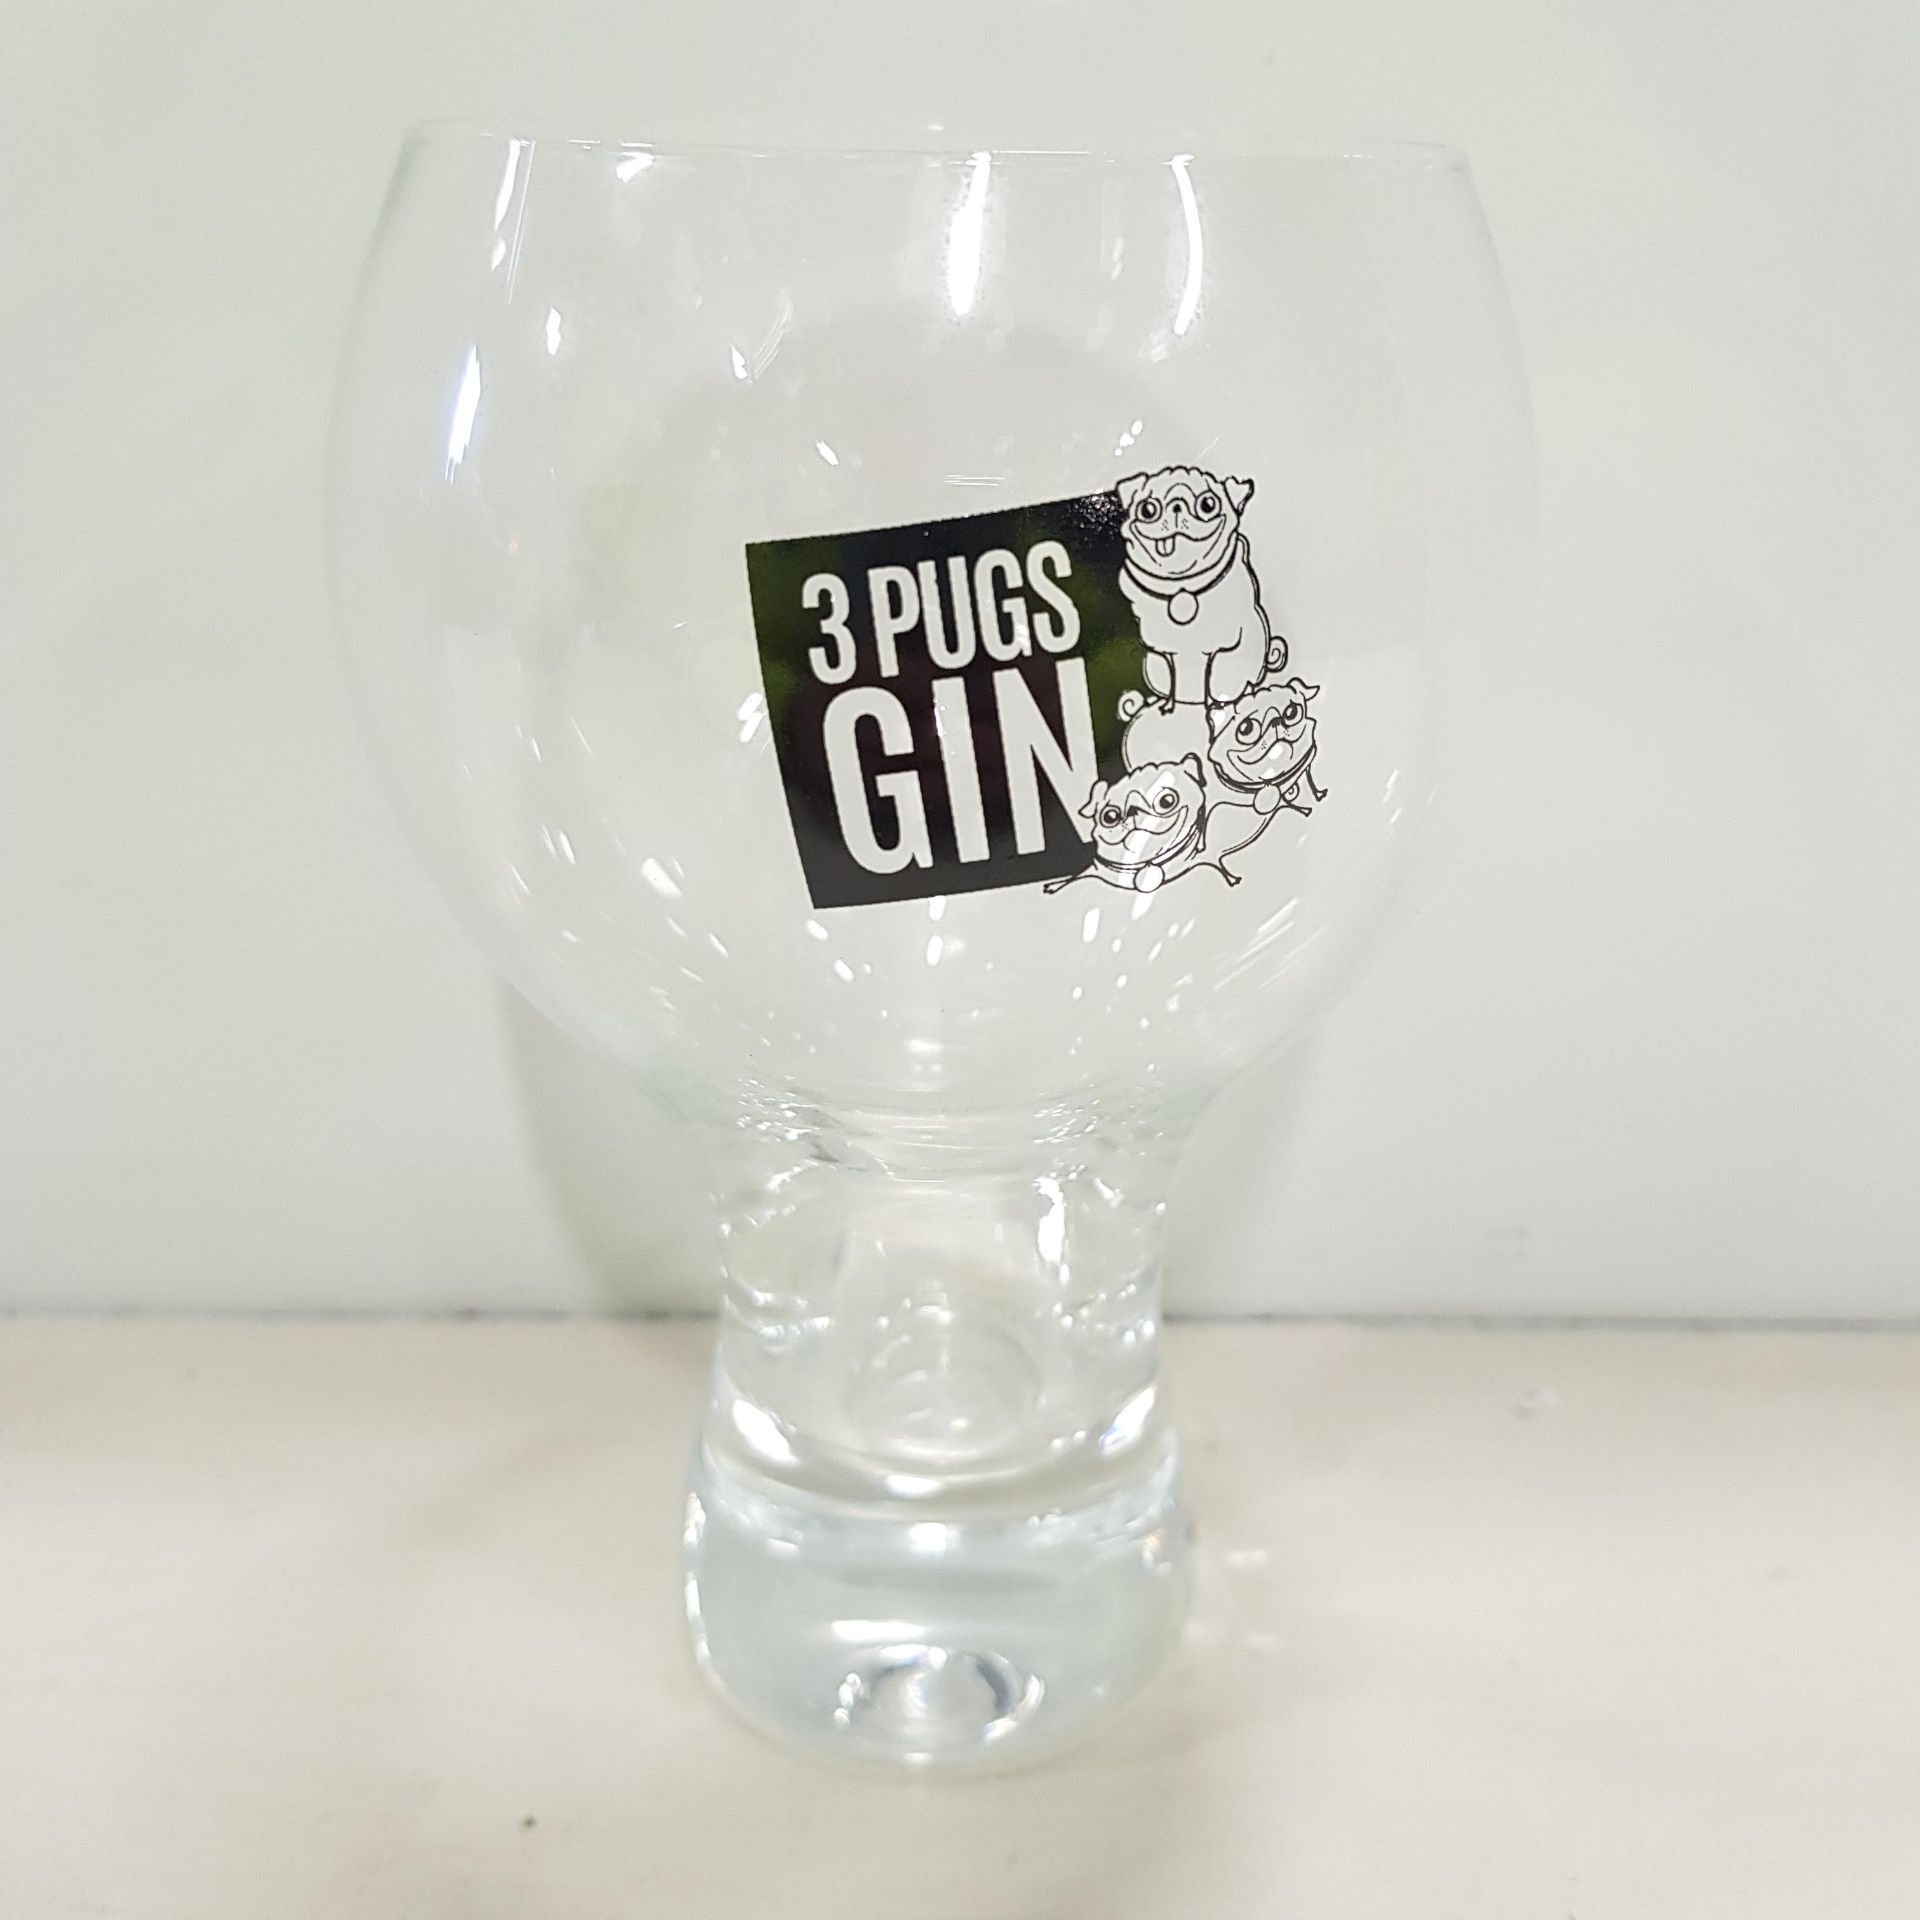 120 X BRAND NEW NEW LORD 3 PUG GIN GLASSES - ( 520 ML ) - IN 20 BOXES